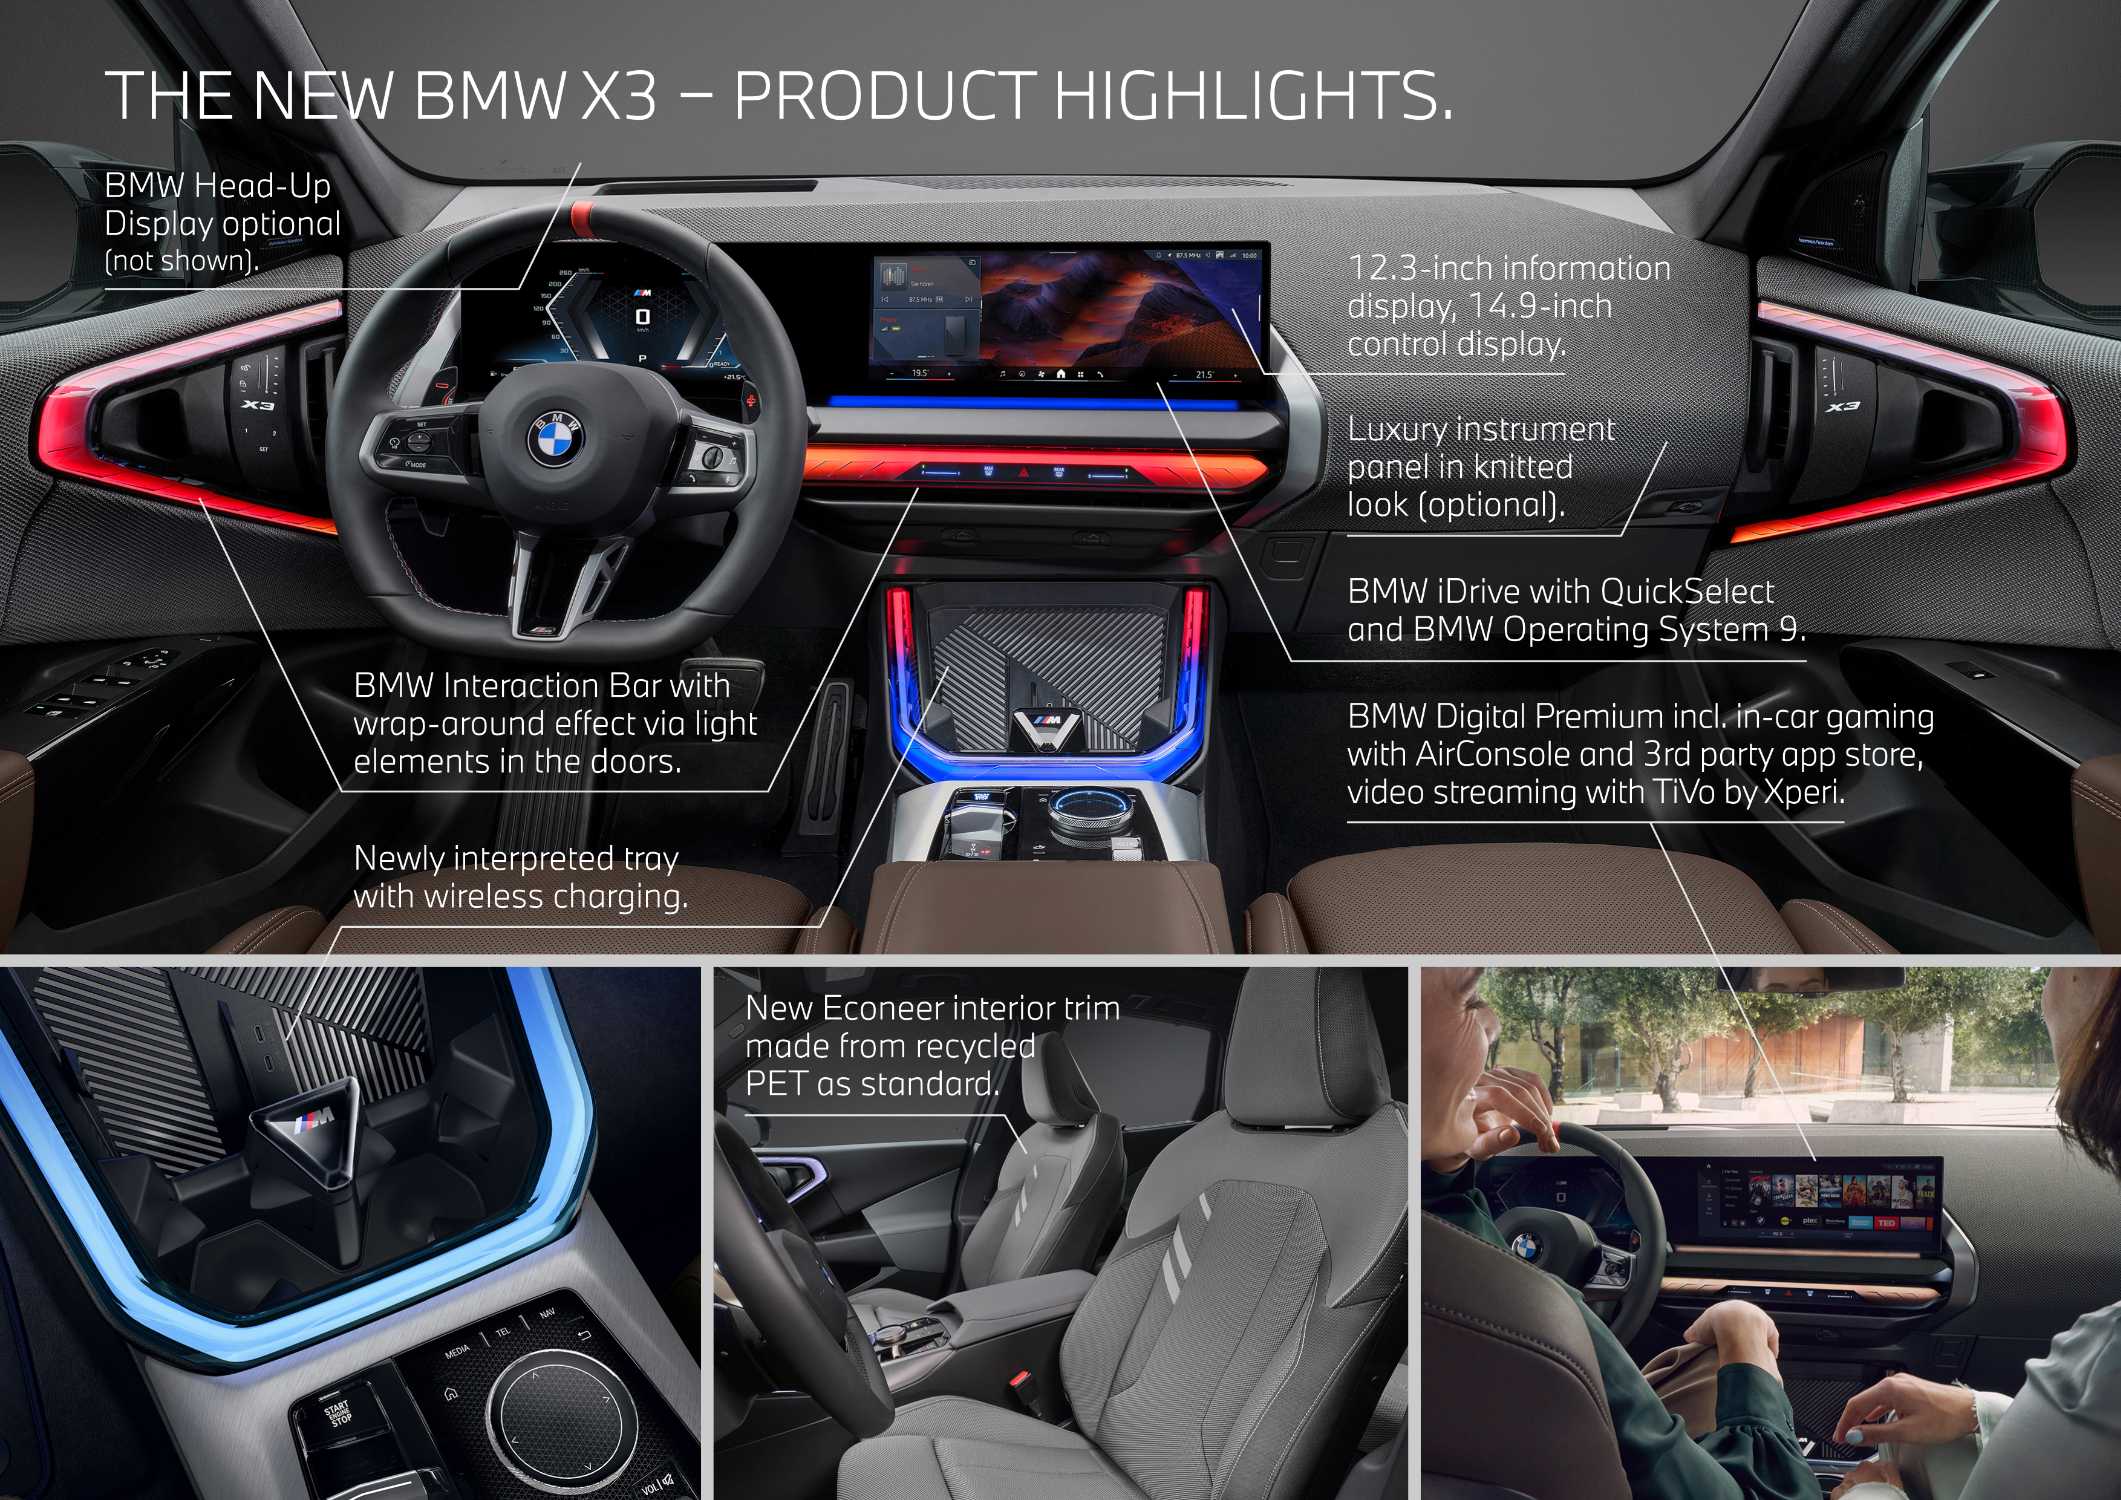 The new BMW X3 M50 xDrive - Infographic. (06/2024)